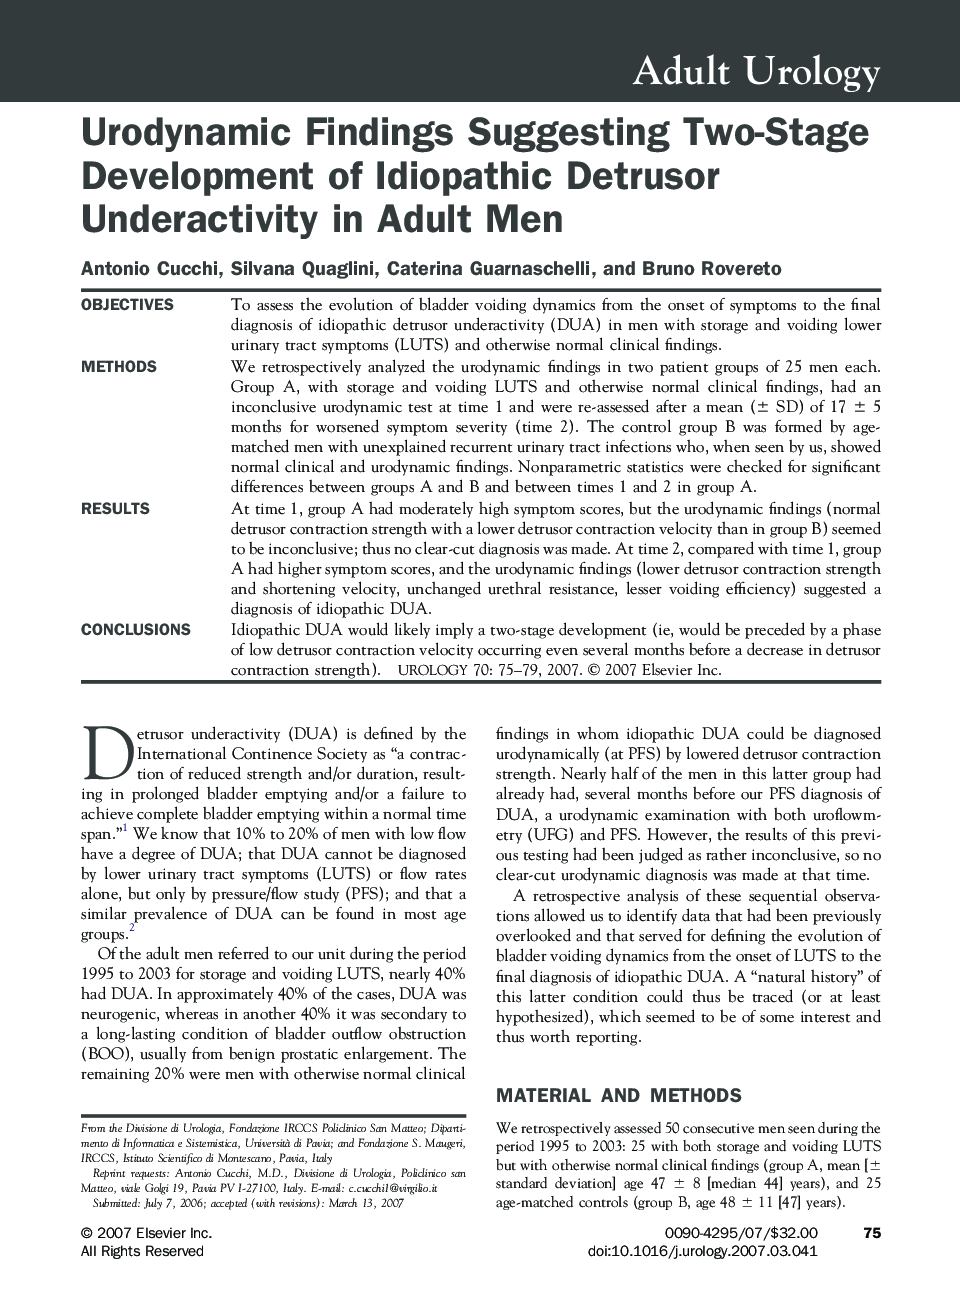 Urodynamic Findings Suggesting Two-Stage Development of Idiopathic Detrusor Underactivity in Adult Men